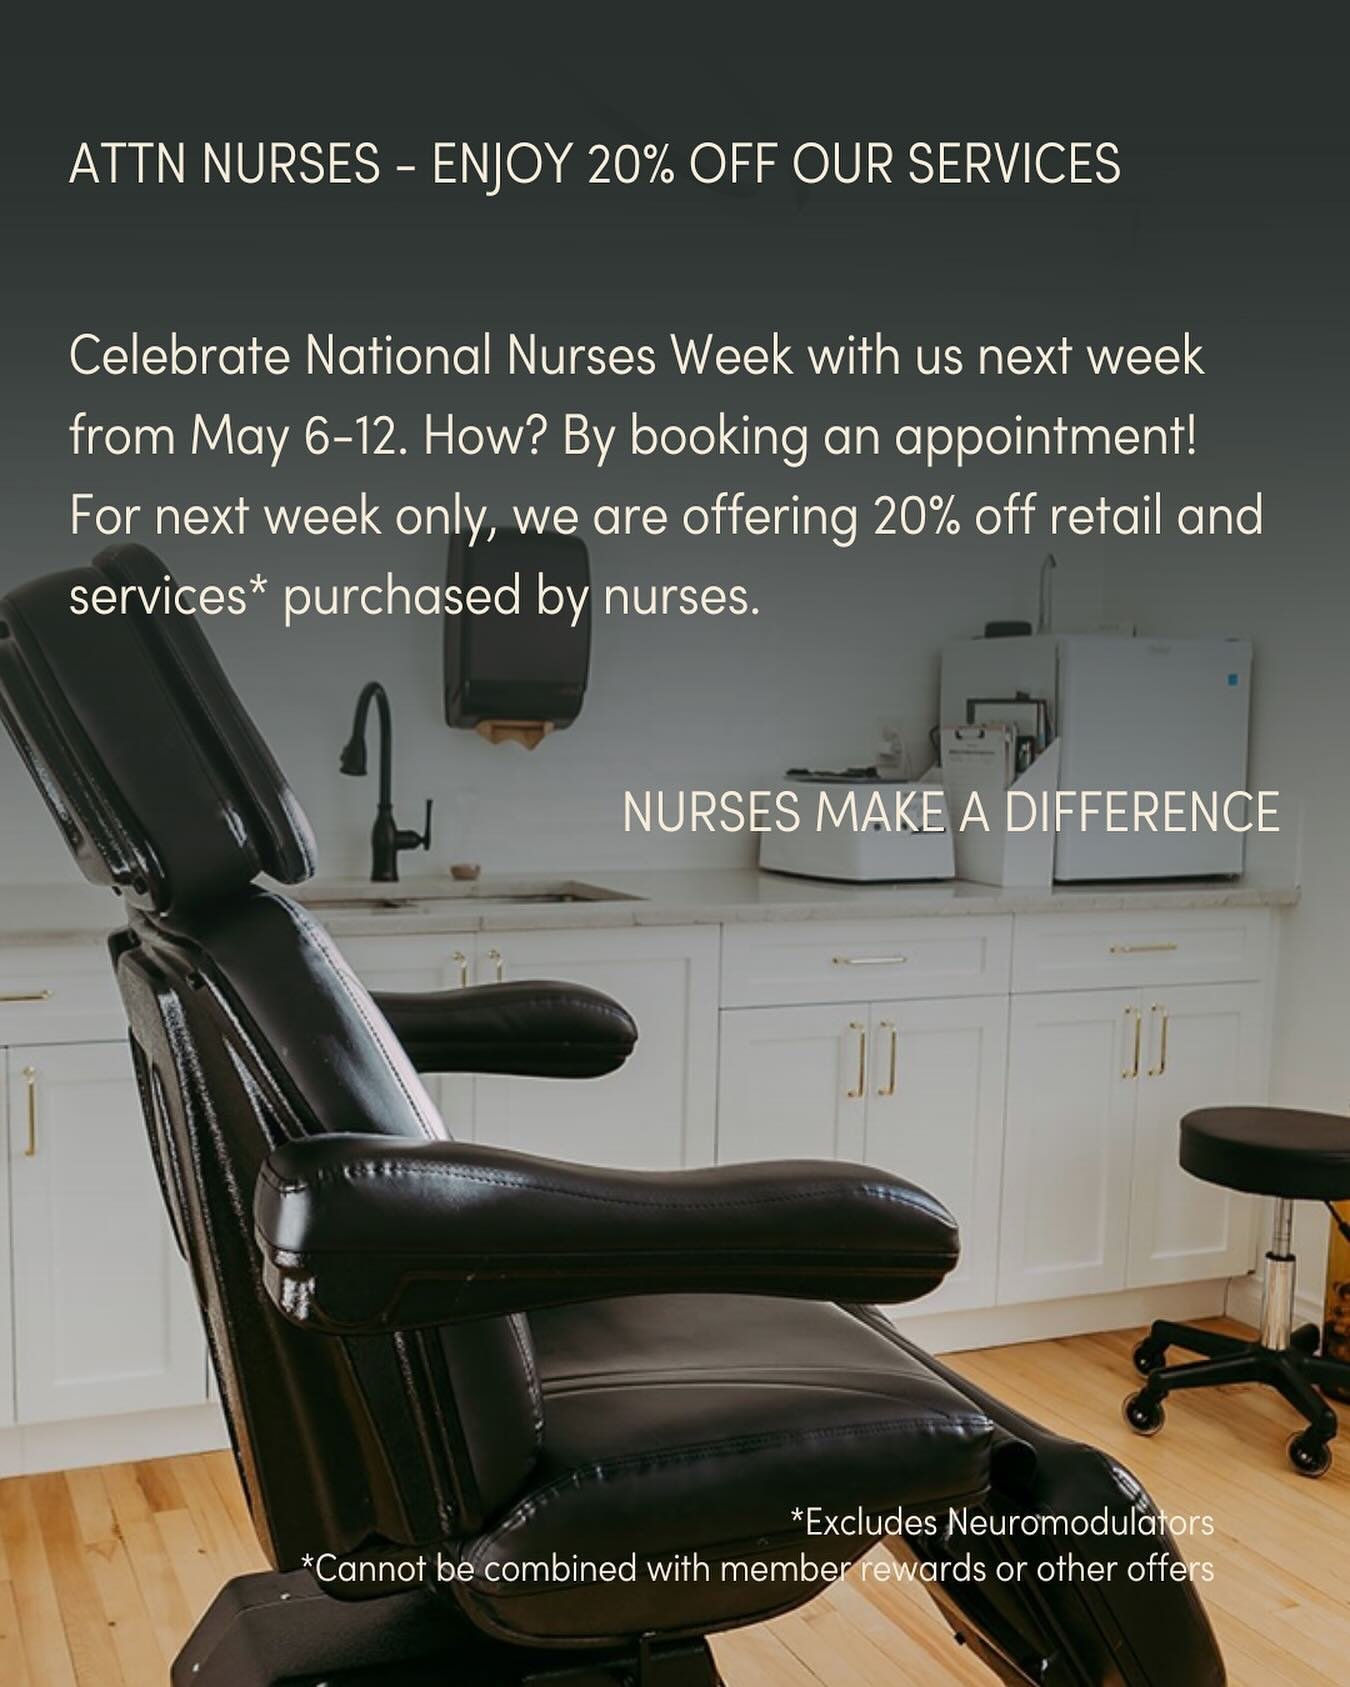 🚨Send this to a hardworking nurse🚨

From May 6-12 we are offering nurses 20% off retail and services (excluding Neuromodulators)🌸

Nurses - visit the link in our bio to make an appointment for next week or stop by the clinic and shop our medical g